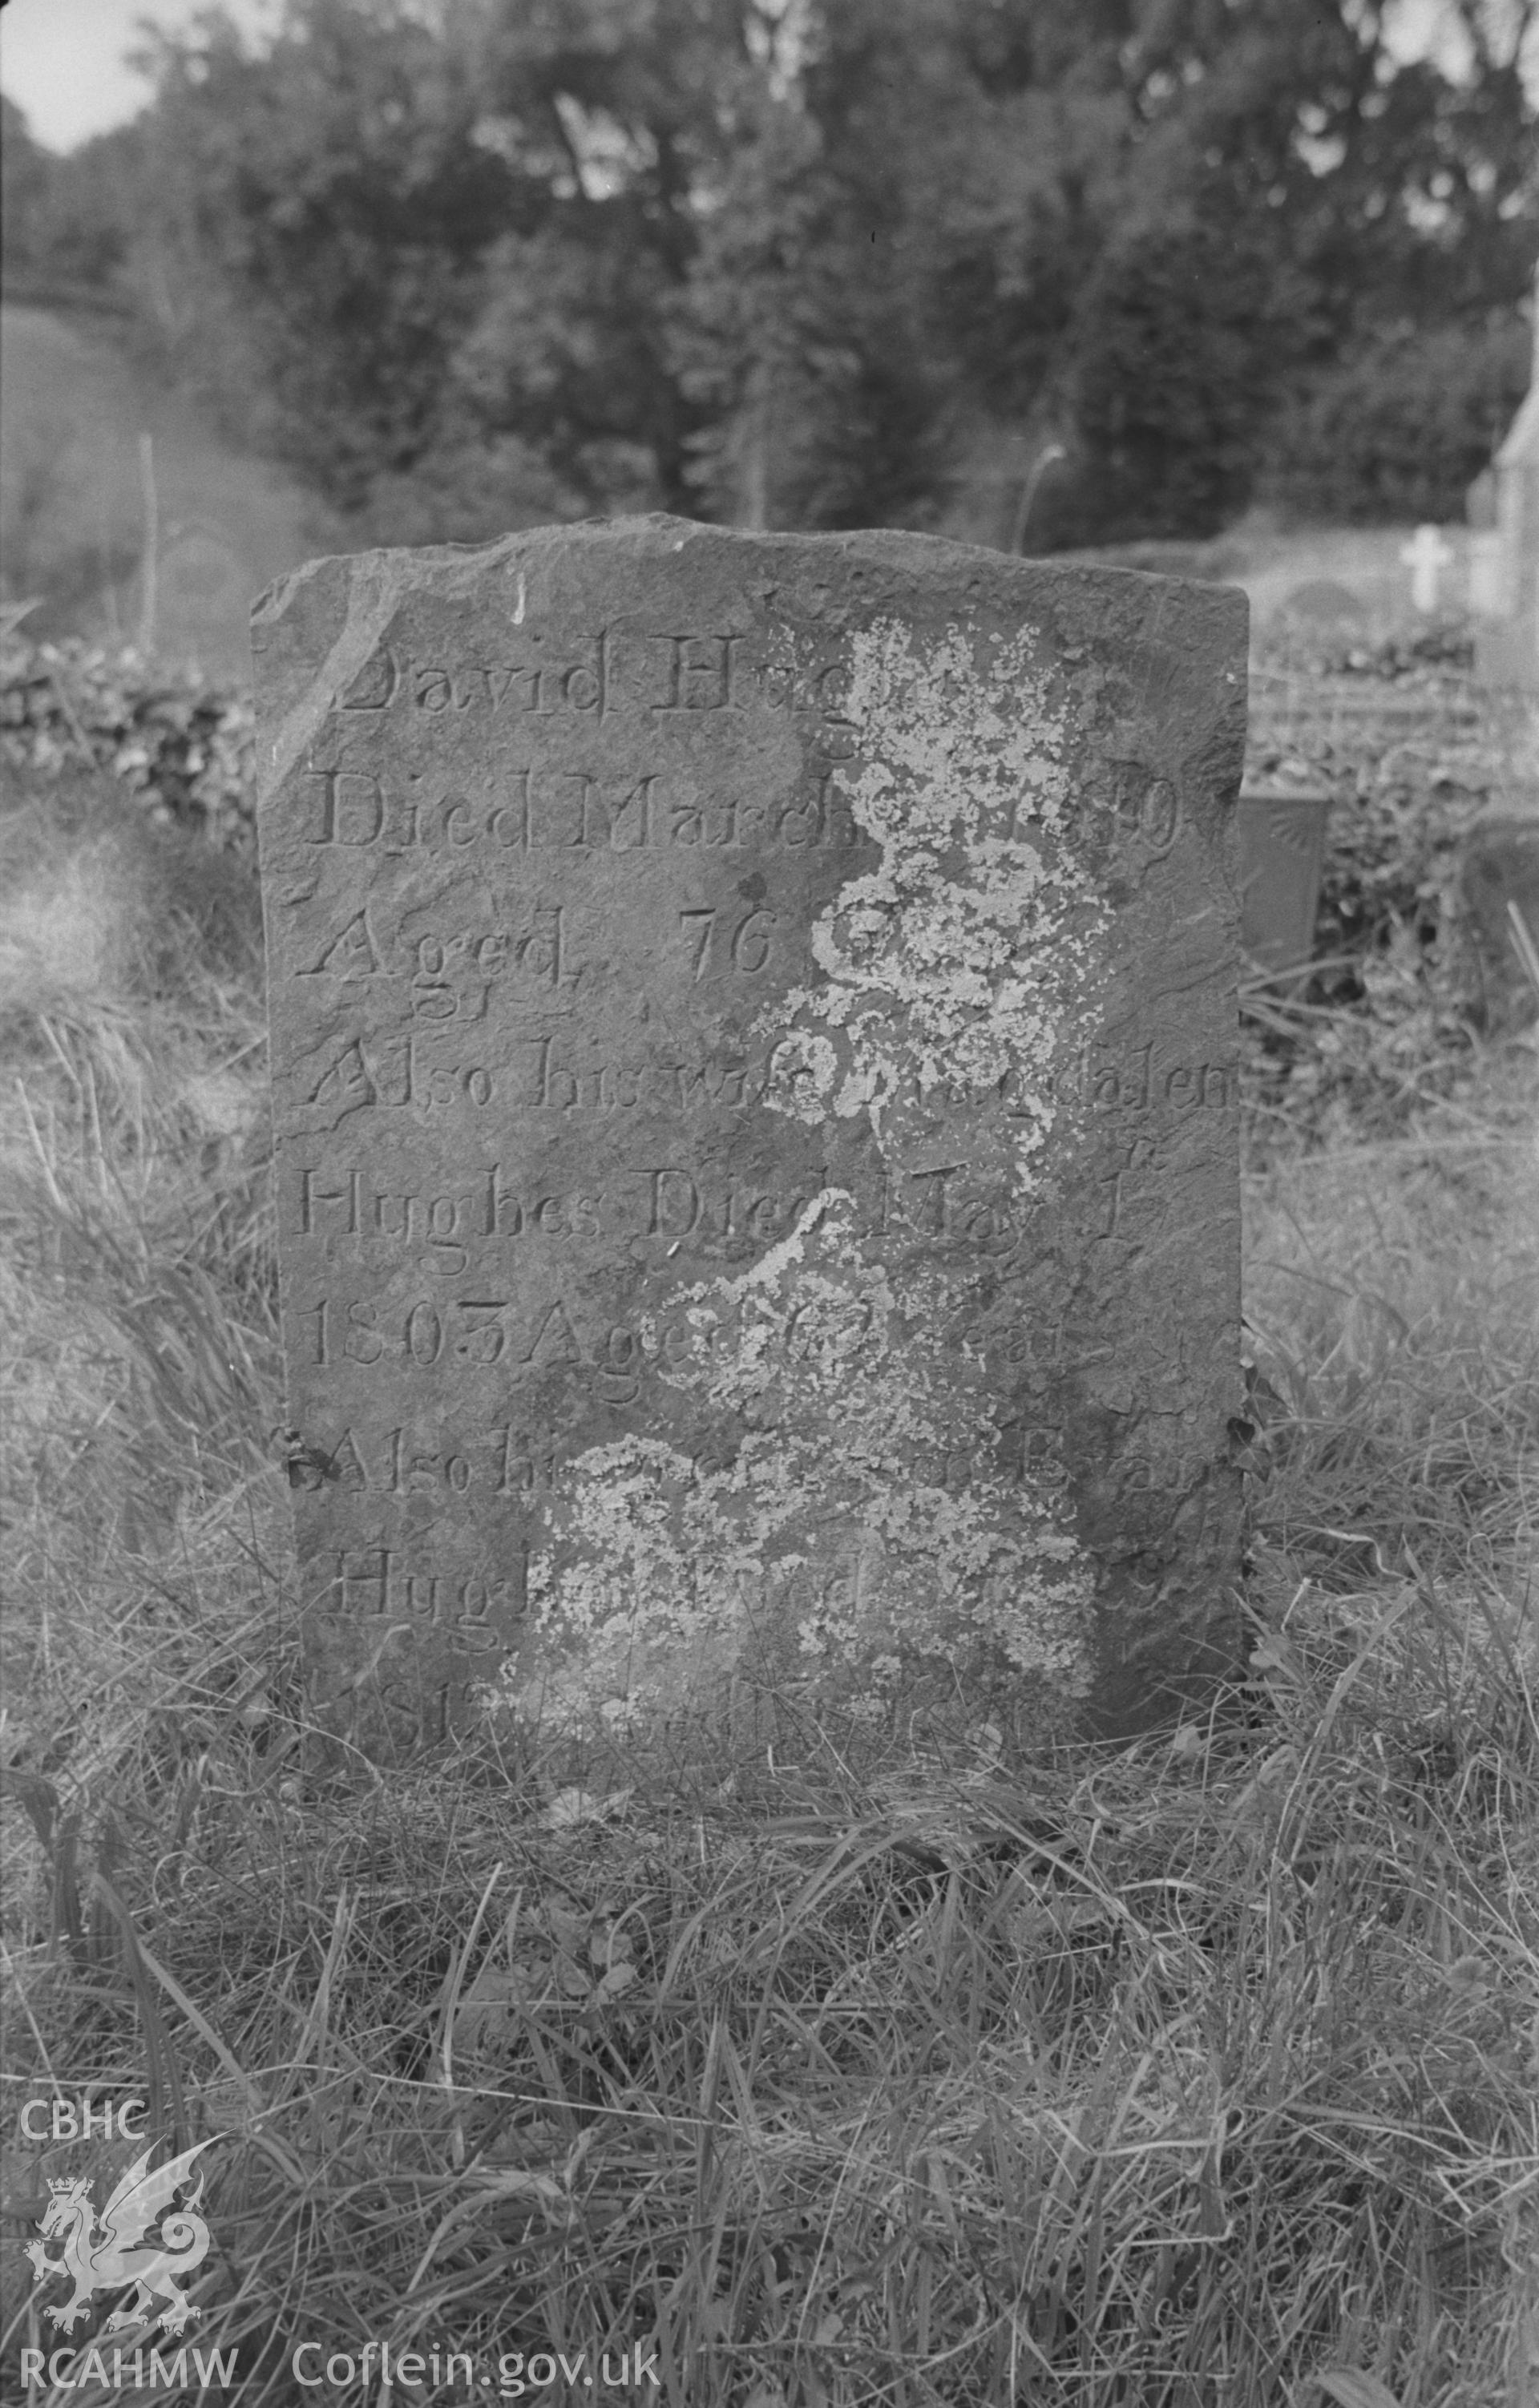 Digital copy of a black and white negative showing view of gravestone in memory of the Hughes family at St. Non's Church, Llanerchaeron. Photographed by Arthur O. Chater in September 1966.